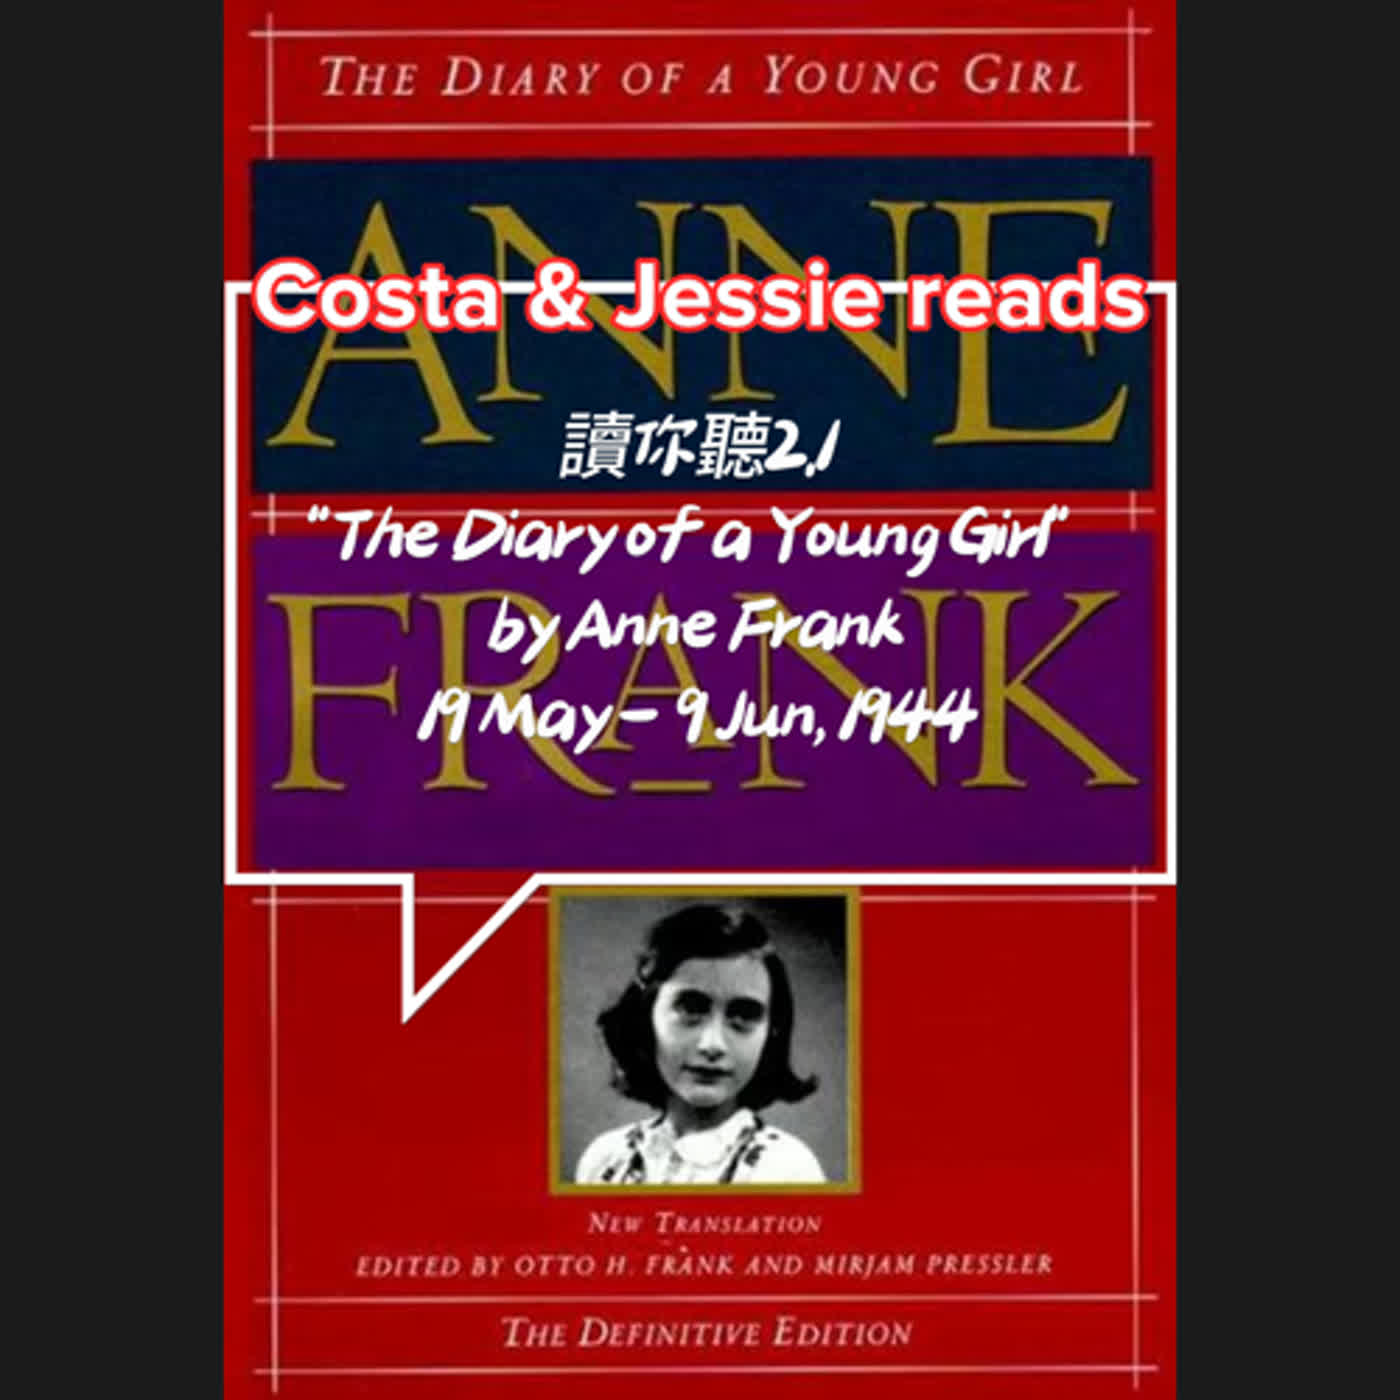 Costa's Audio Book: Anne Frank "The Diary of a Young Girl" Definitive Edition Pt23 讀你聽2.1《安妮日記》完整版